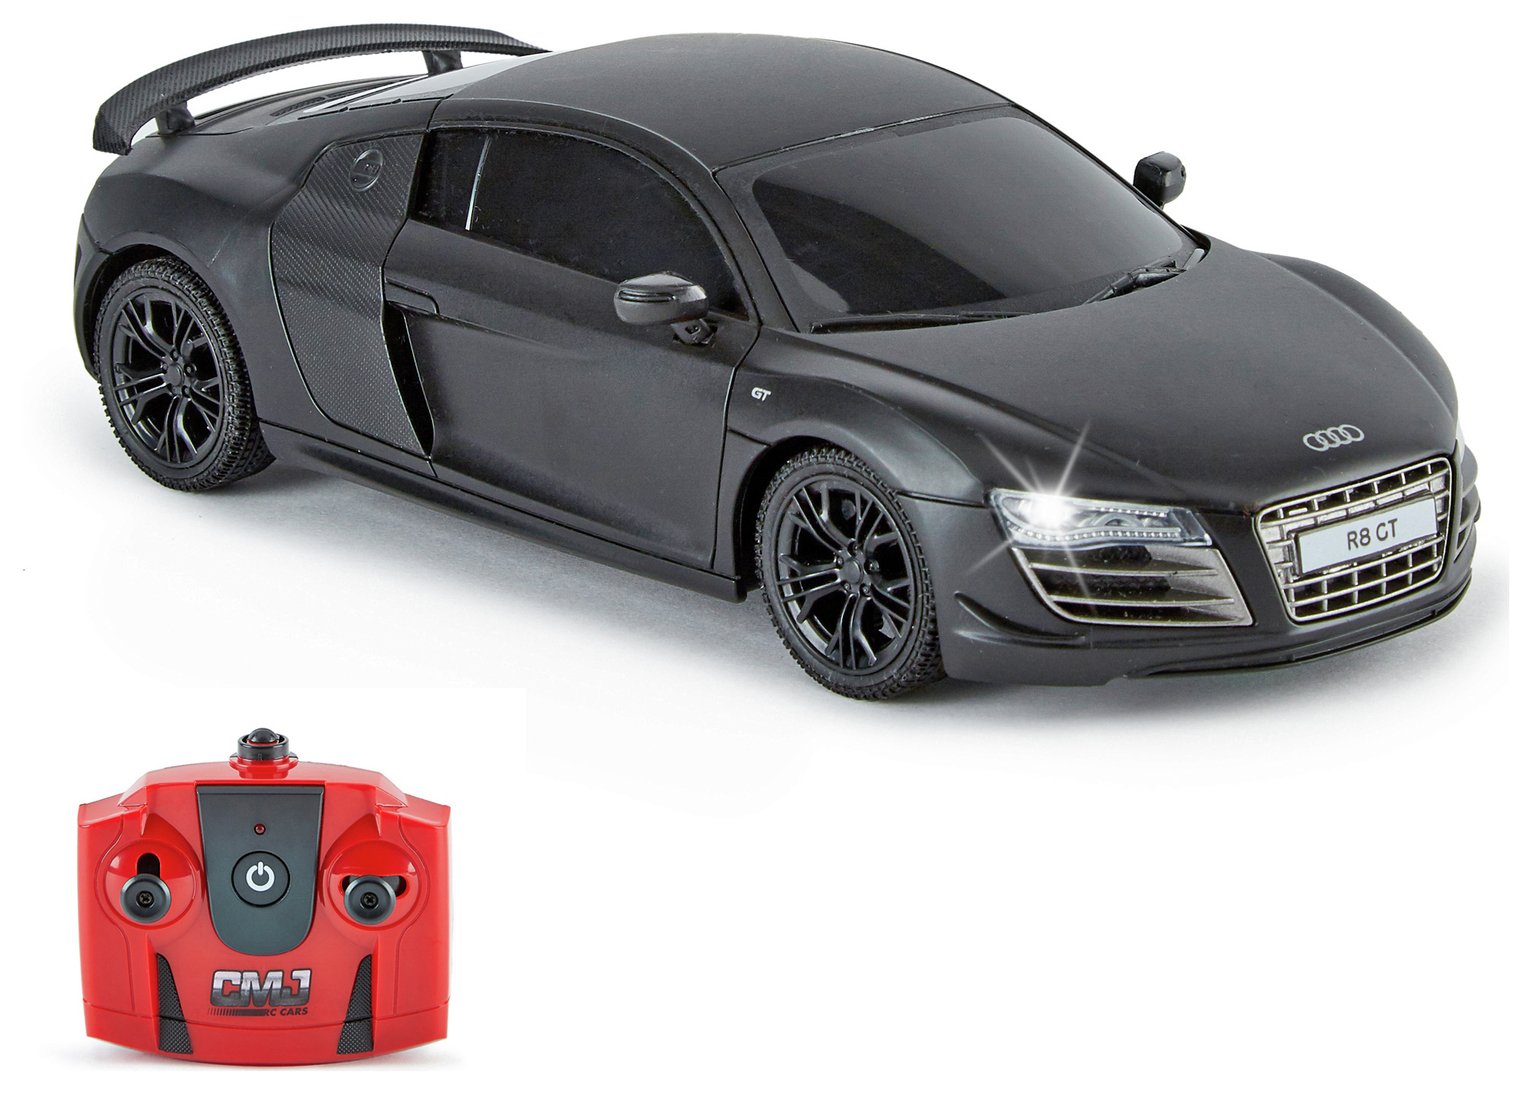 Radio Controlled Audi R8 GT Scale 1:24 Review